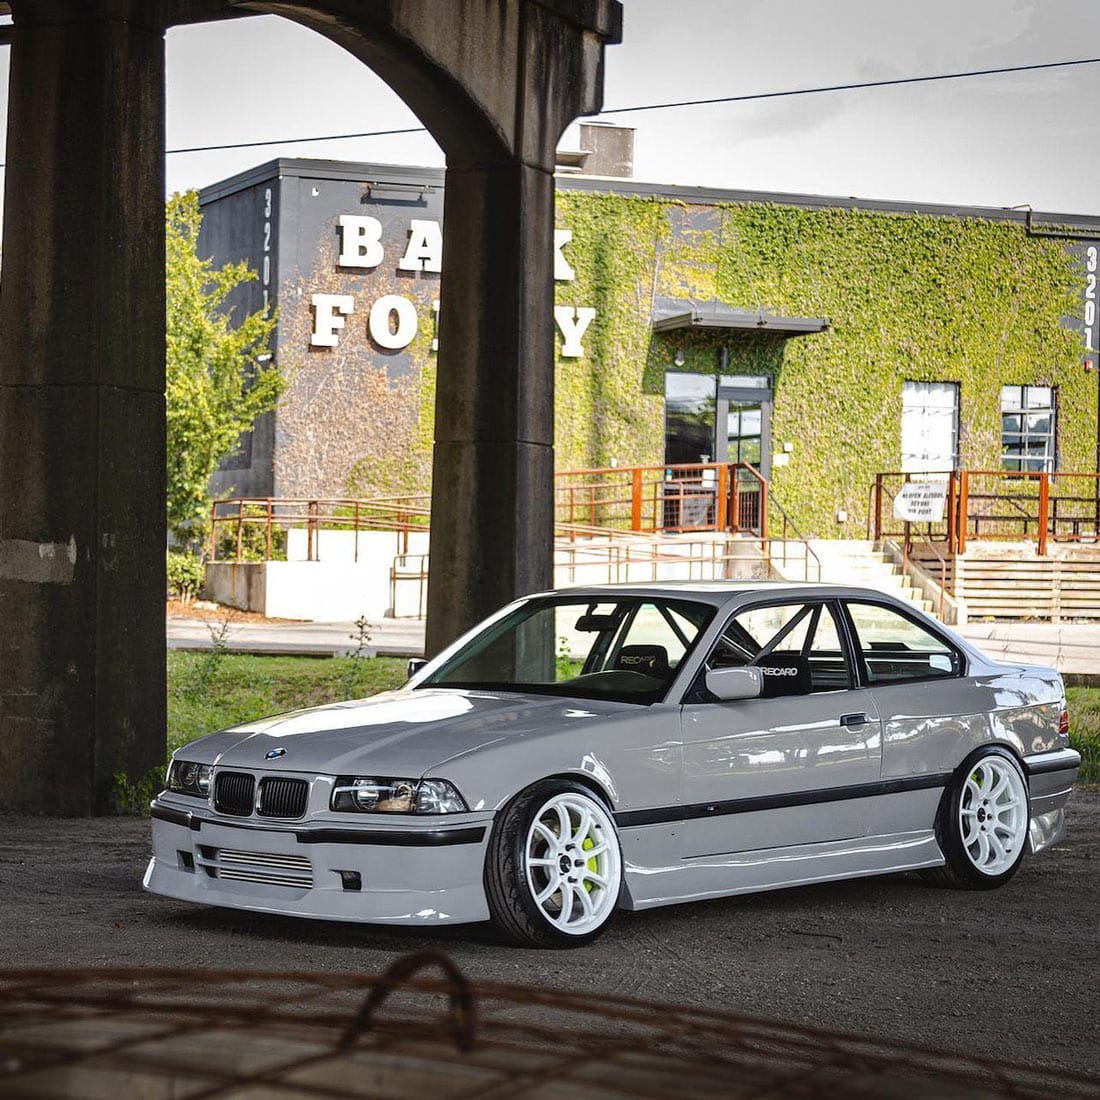 https://cliqtuning.com/wp-content/uploads/2017/06/bmw-e36-coupe-overfenders-and-aero-kit-for-drift-and-stane-cliqtuning3.jpg